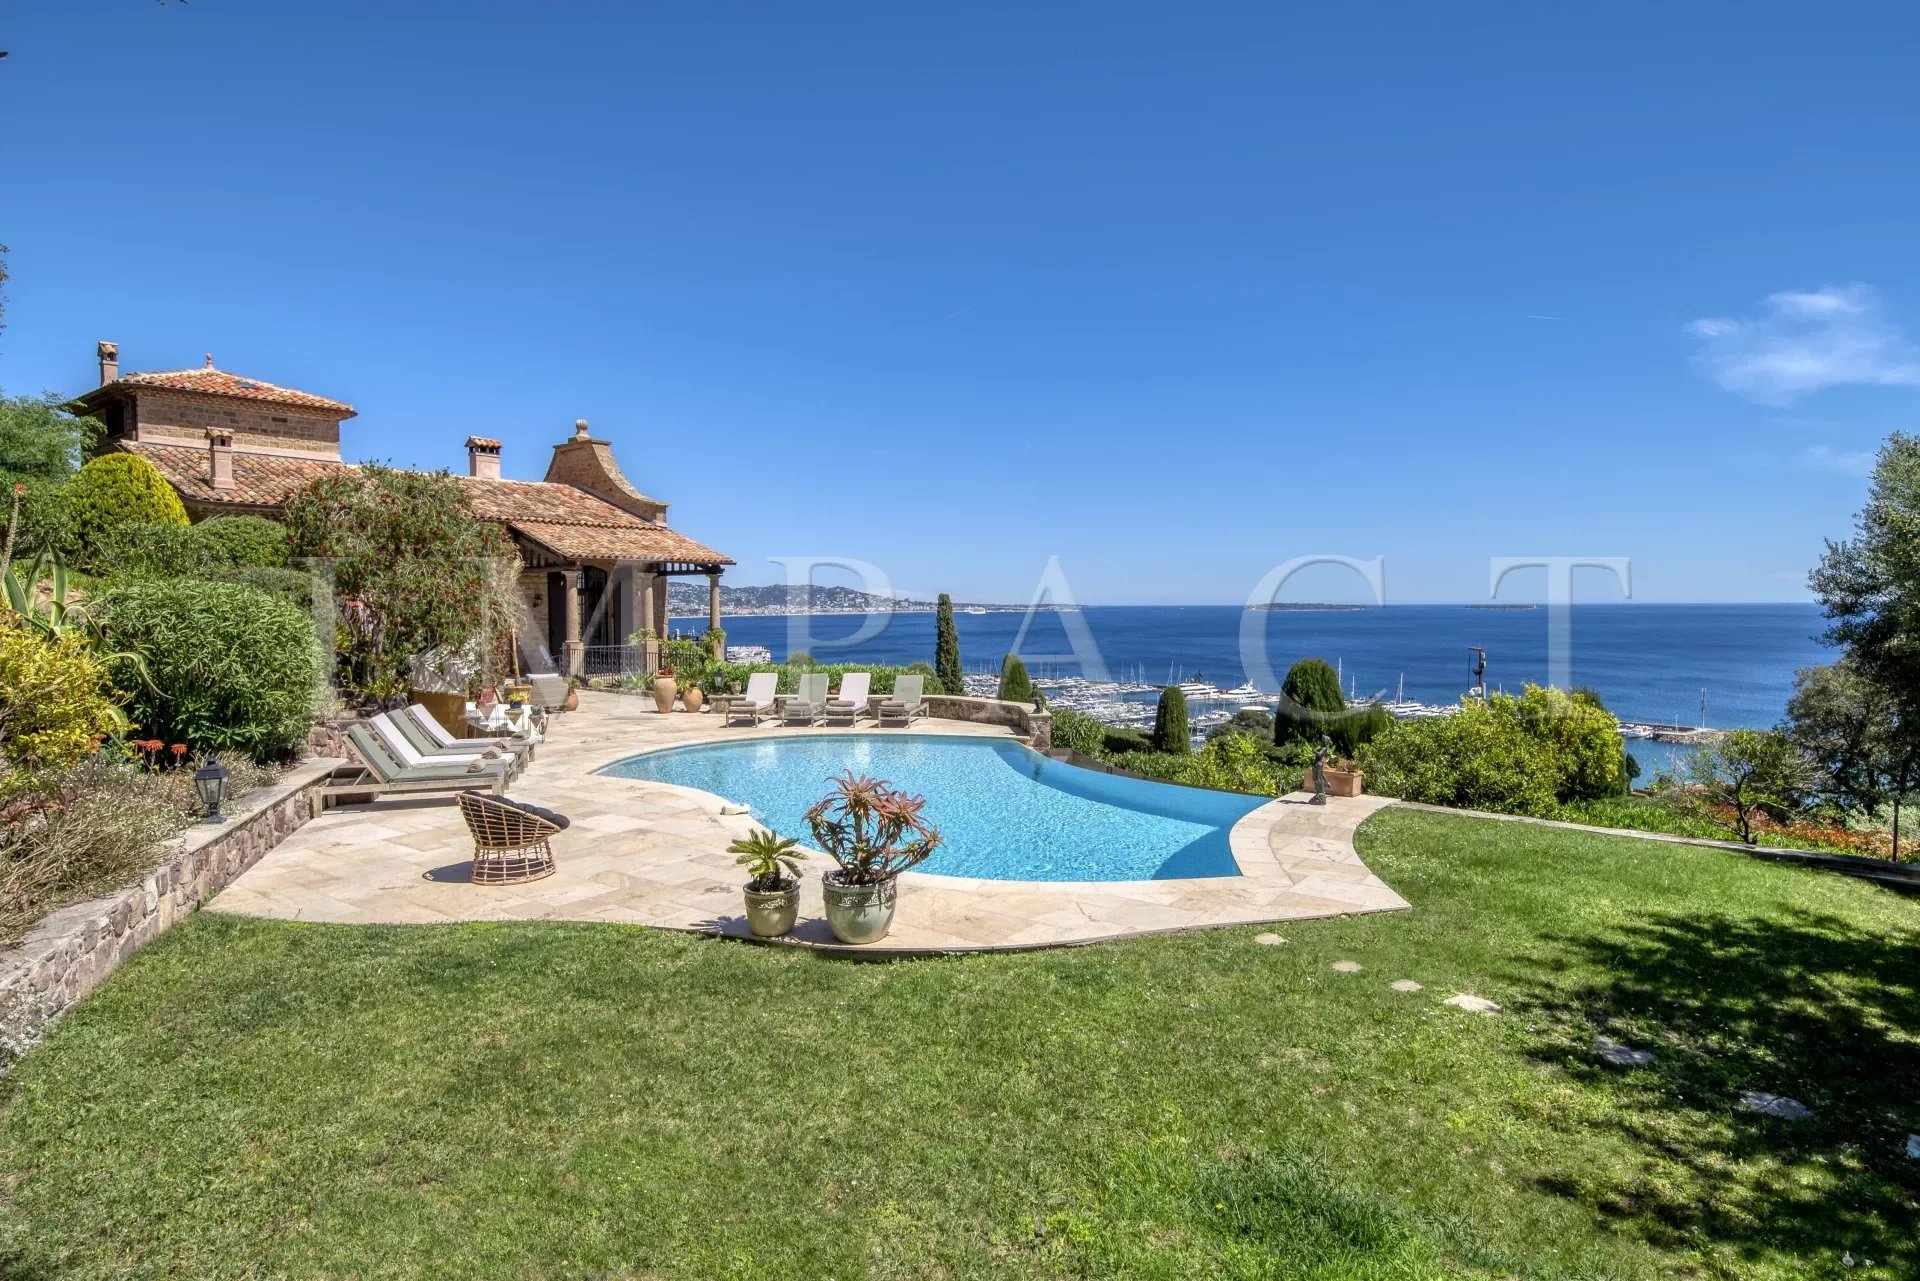 Superb 5 bedroom pool property just minutes from the beach.